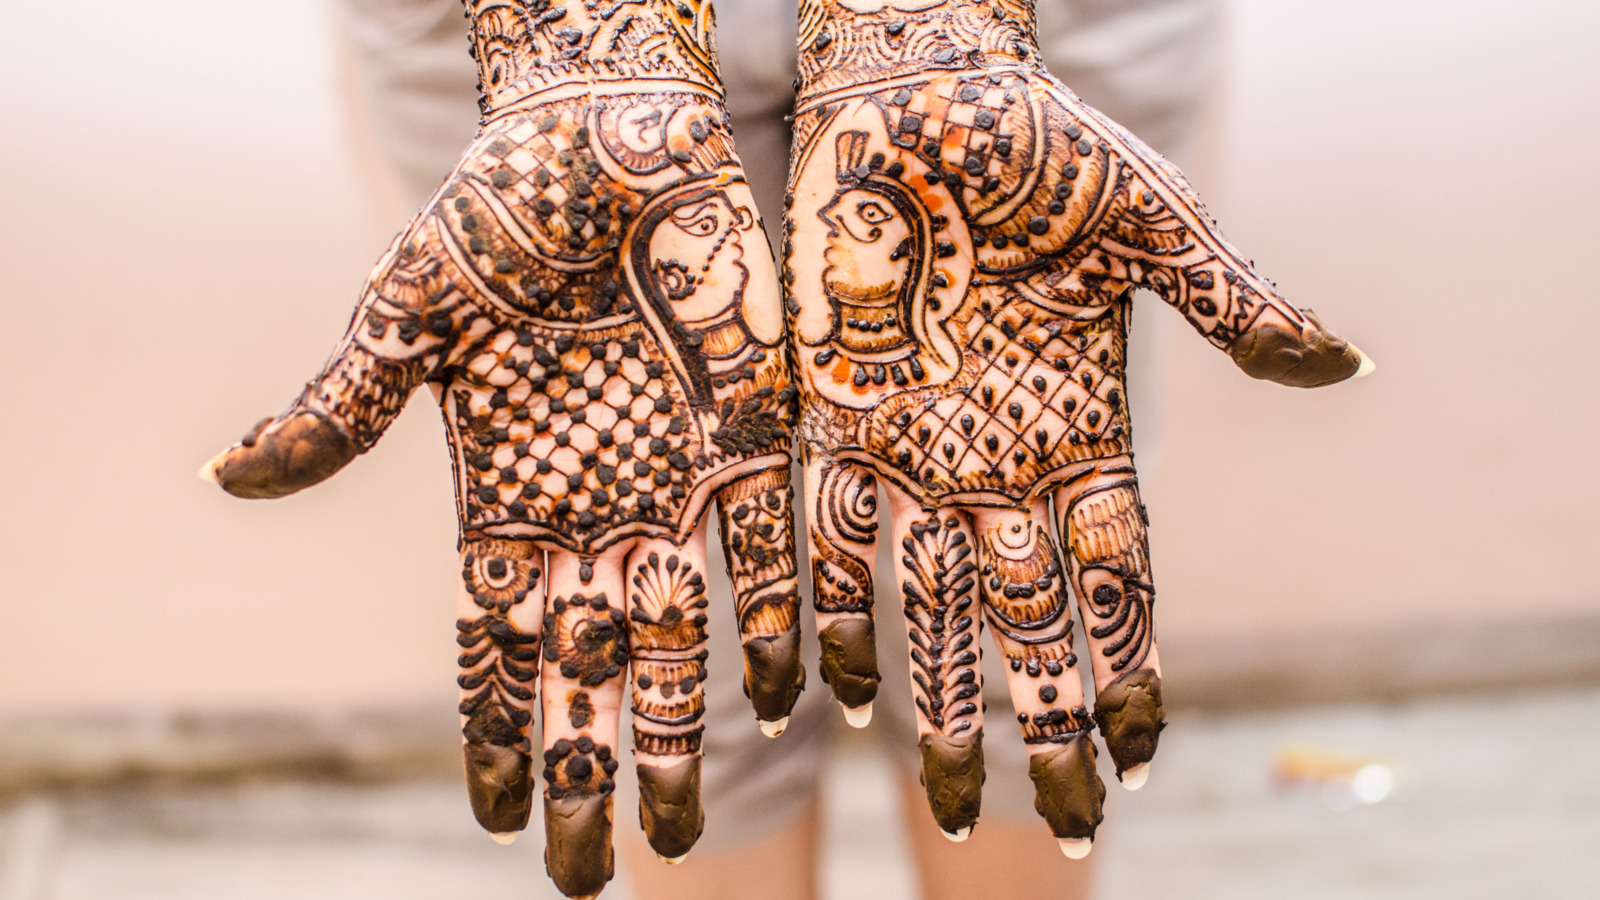 Here's Why You Should Think Twice About Getting A Henna Tattoo